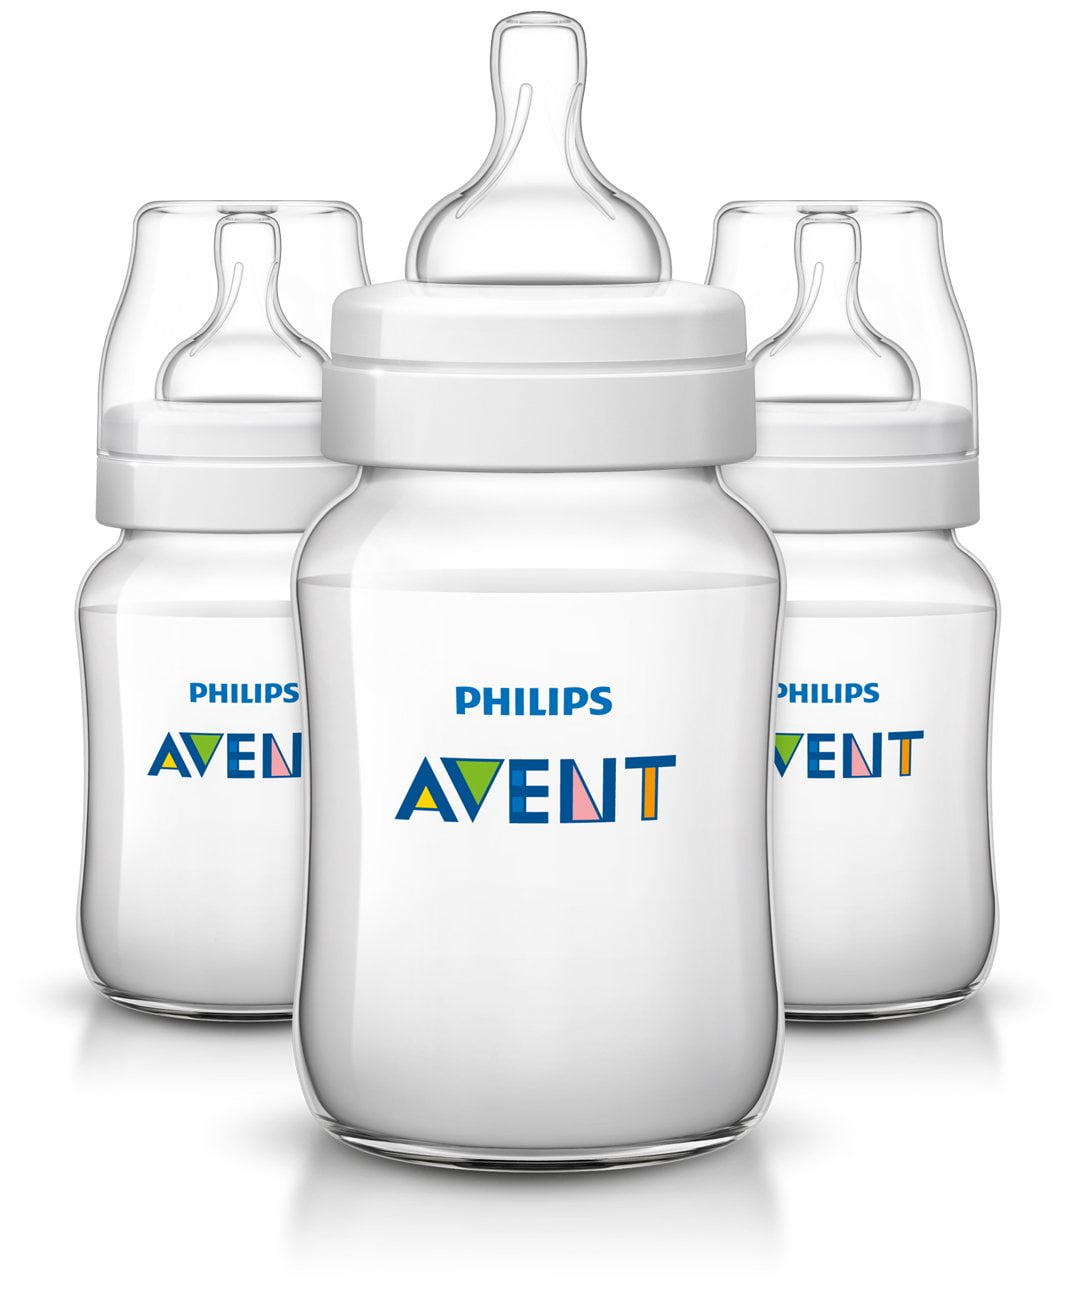 Philips Avent Anti-Colic BPA-Free Baby Bottles - 9oz, Clear, 3 ct - image 1 of 9